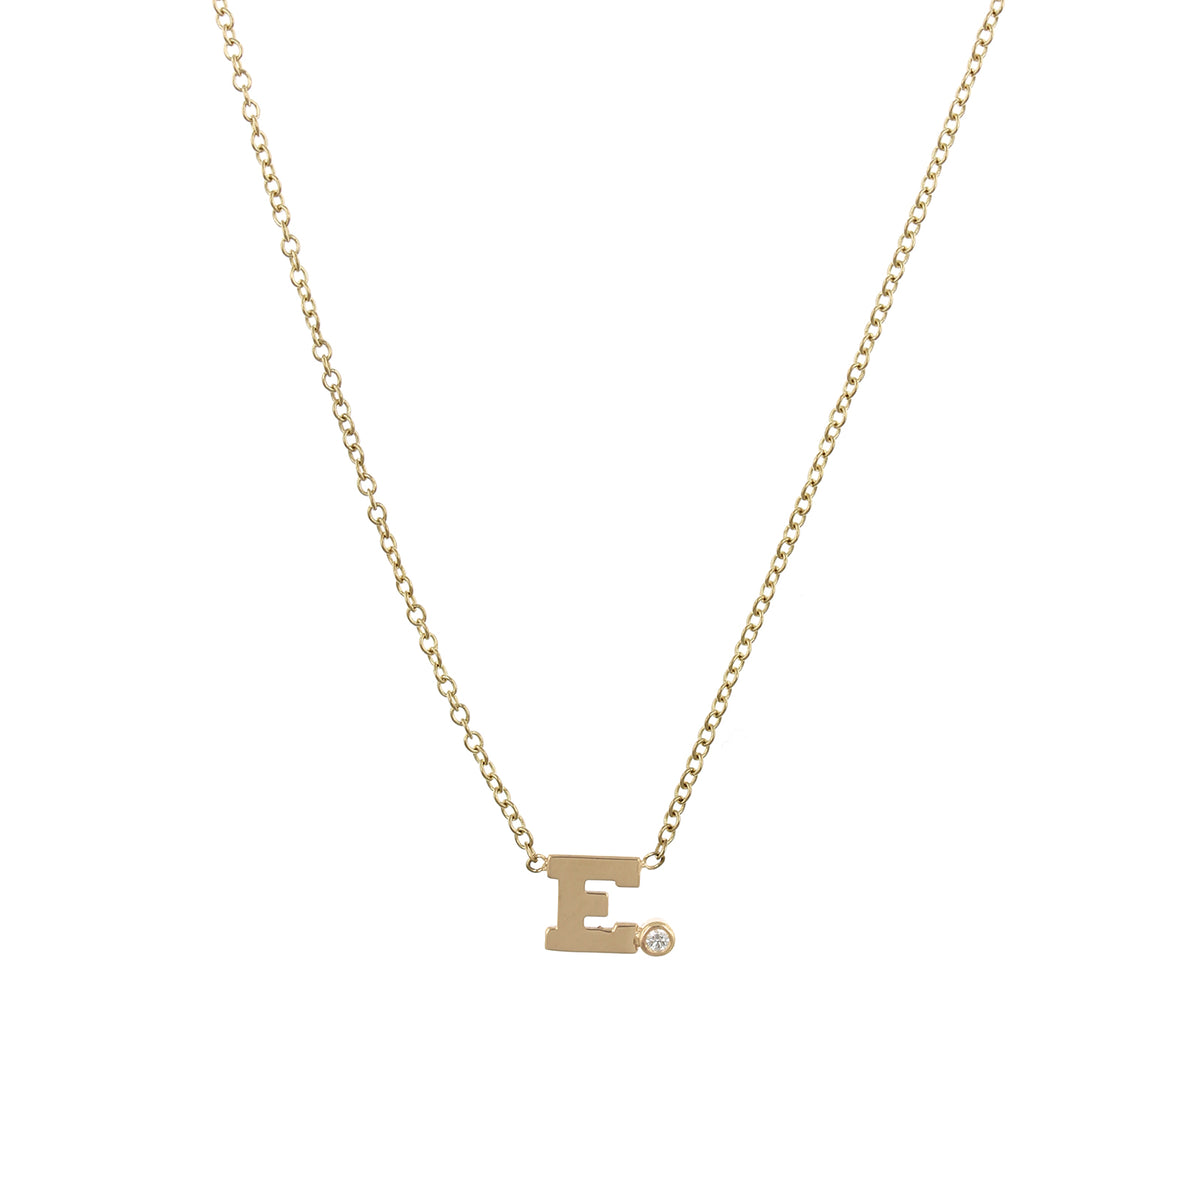 14K Yellow Gold Initial E Side Diamond Necklace